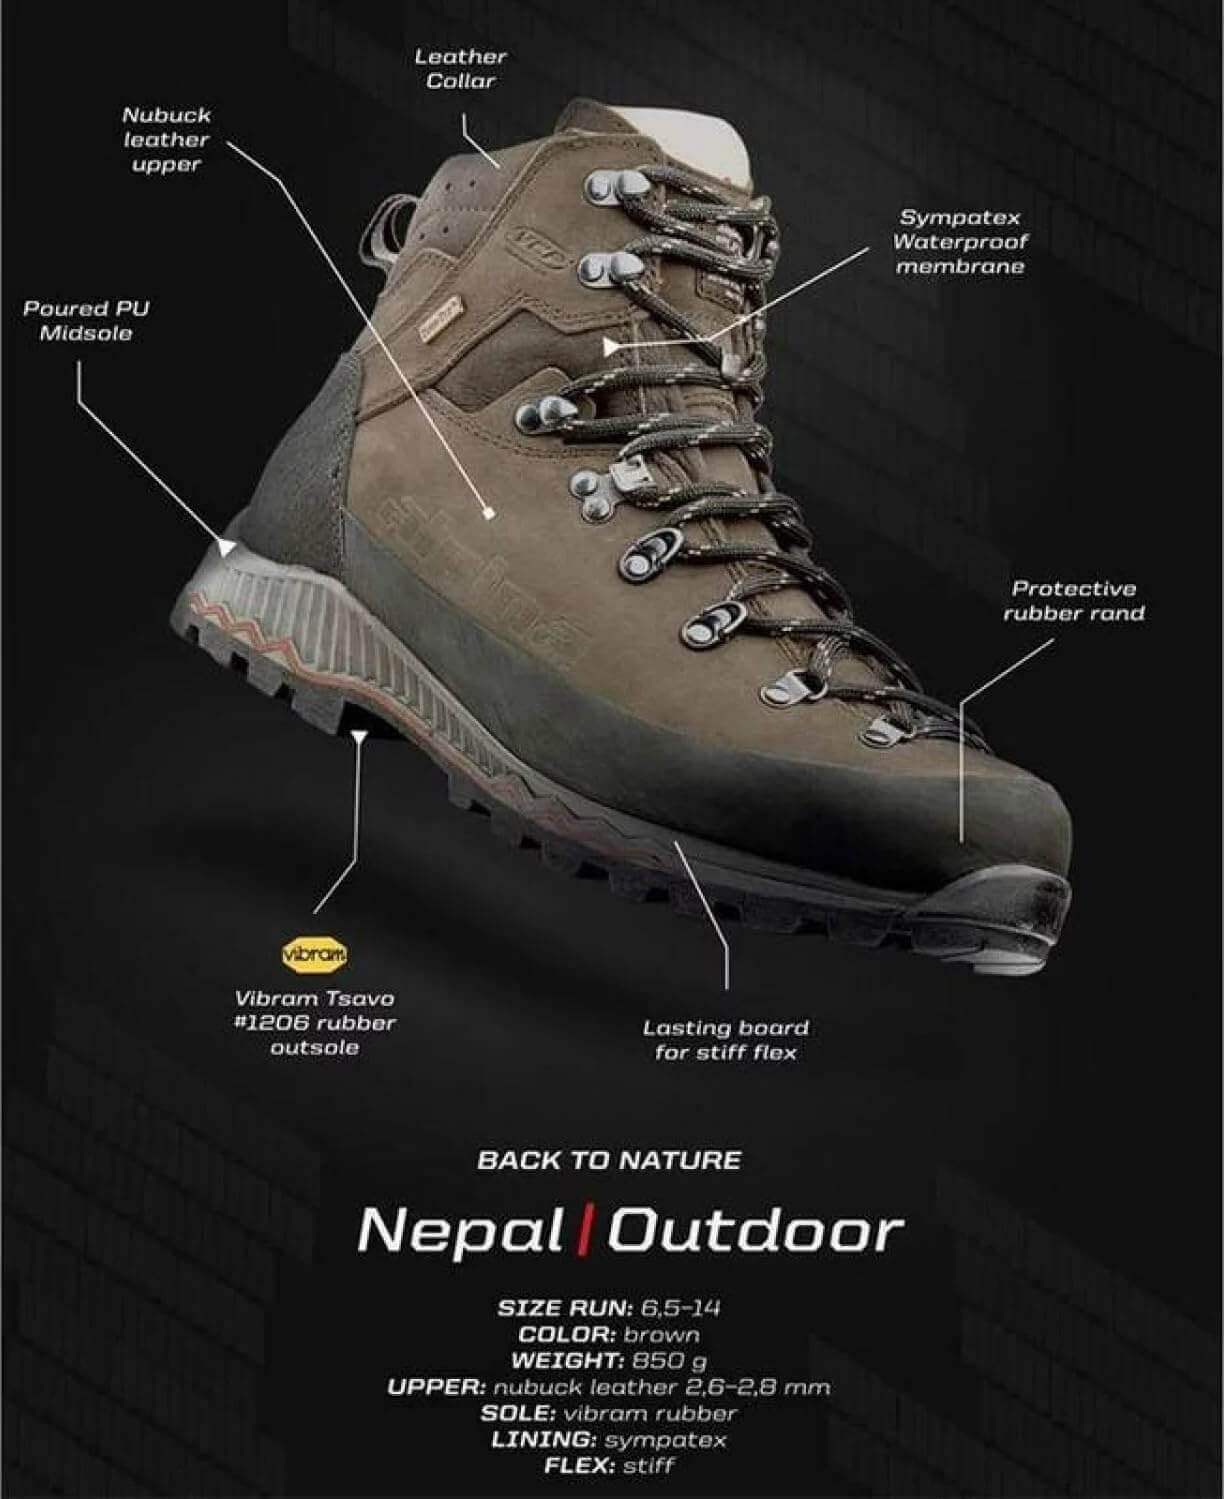 Shop The Latest >Alpina Men & Women's Full Leather Waterproof Hiking boots > *Only $365.88*> From The Top Brand > *Alpinal* > Shop Now and Get Free Shipping On Orders Over $45.00 >*Shop Earth Foot*